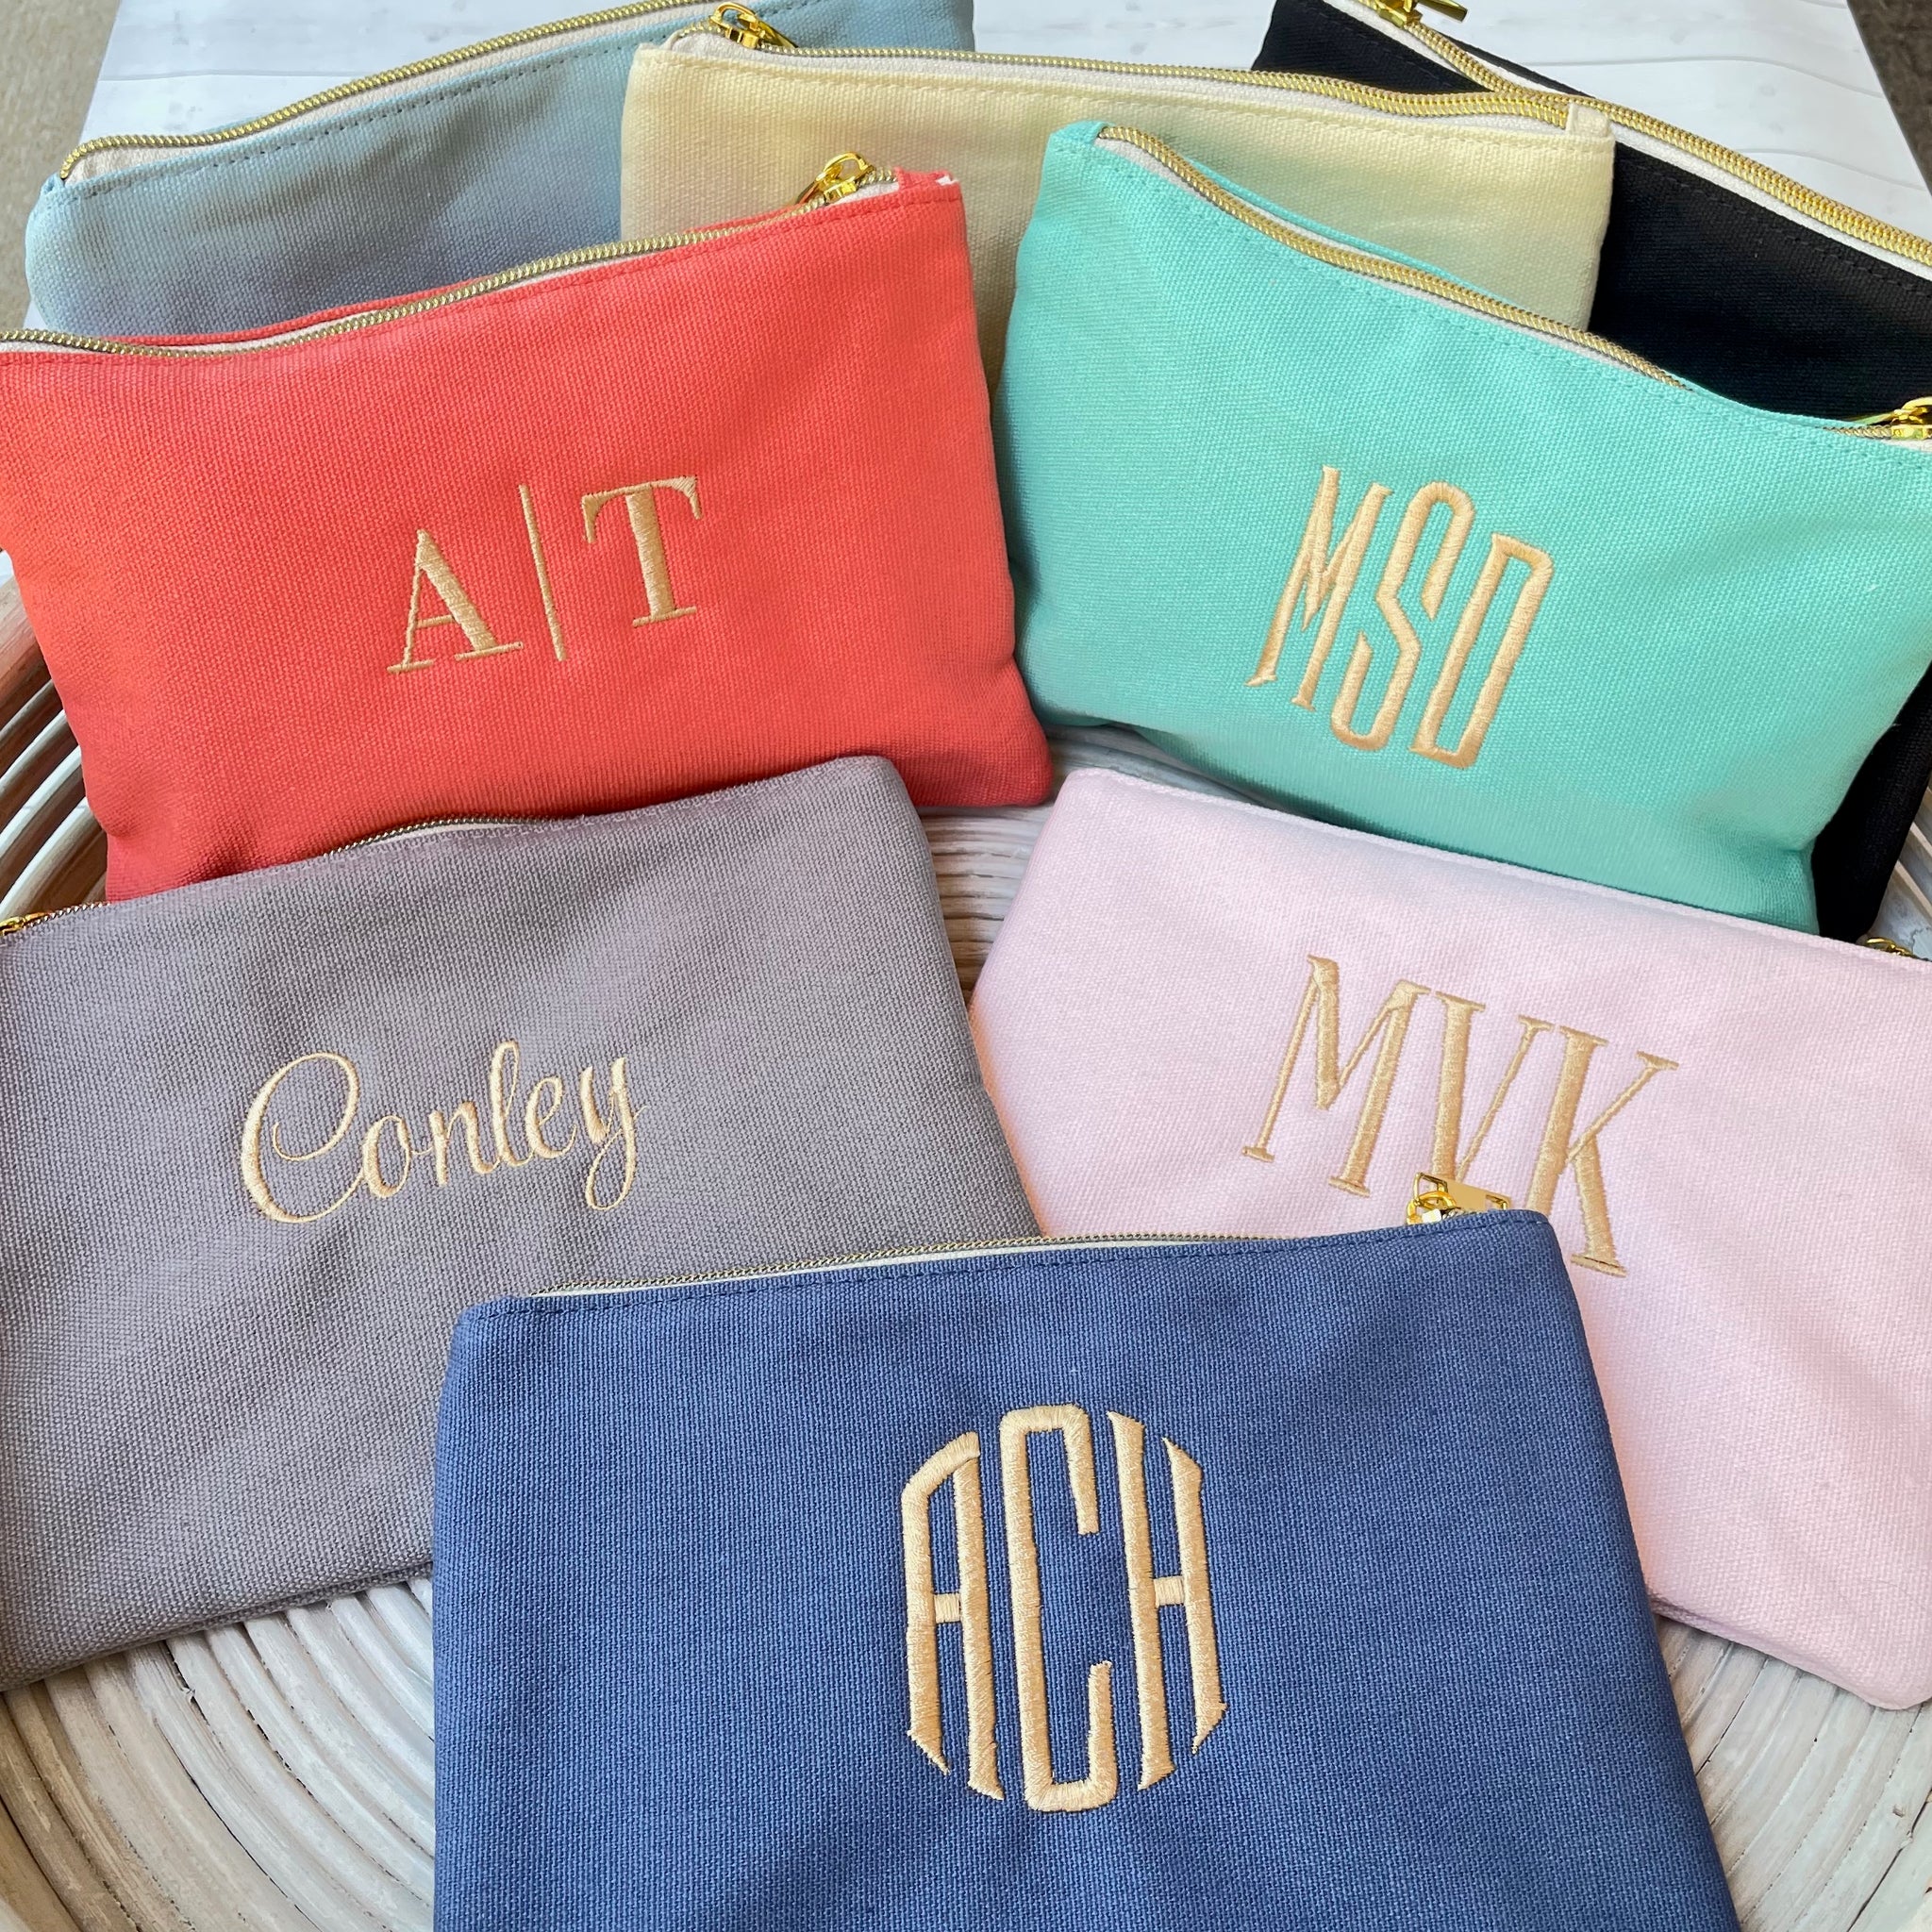 Monogram Canvas Cosmetic Bag - Happy Thoughts Gifts